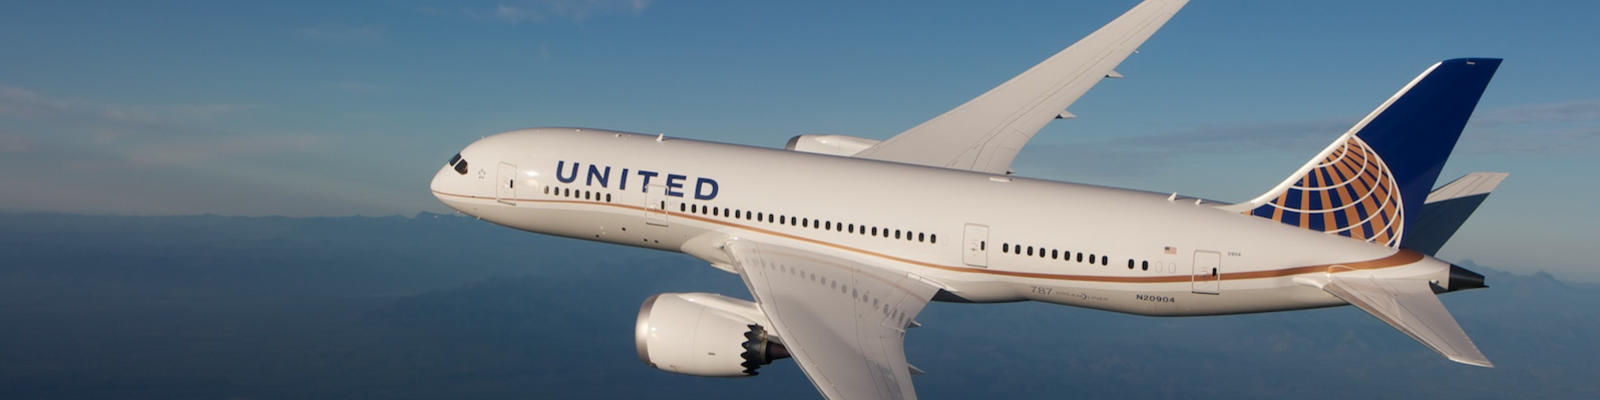 United Airlines' Dreamliner 787-9 in the sky. Image: Courtesy.